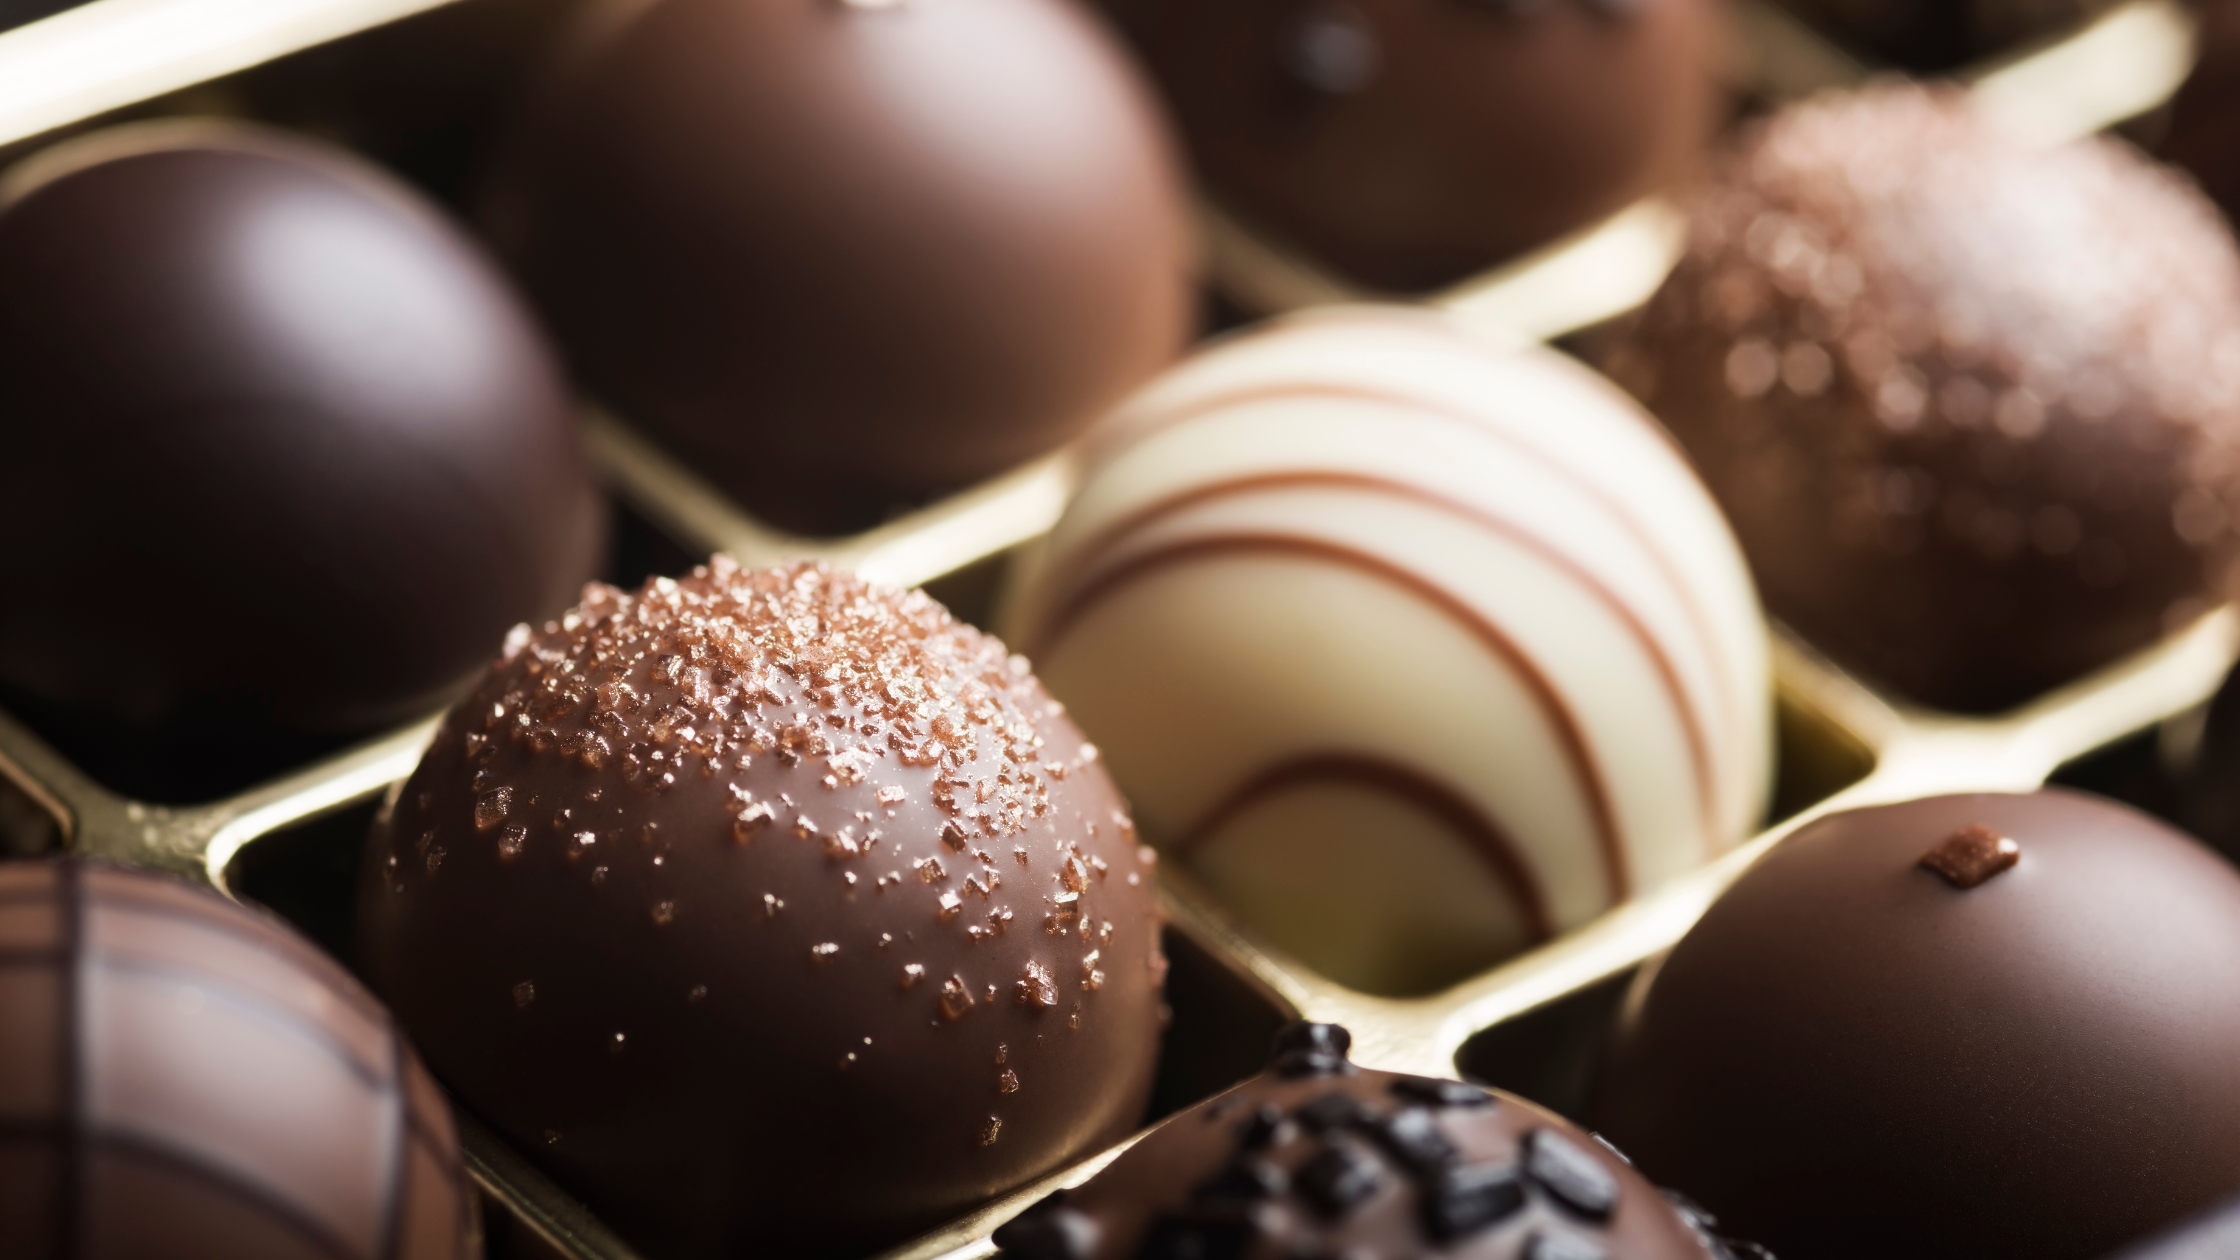 A Taste of Luxury: What Makes Belgian Chocolate So Special?